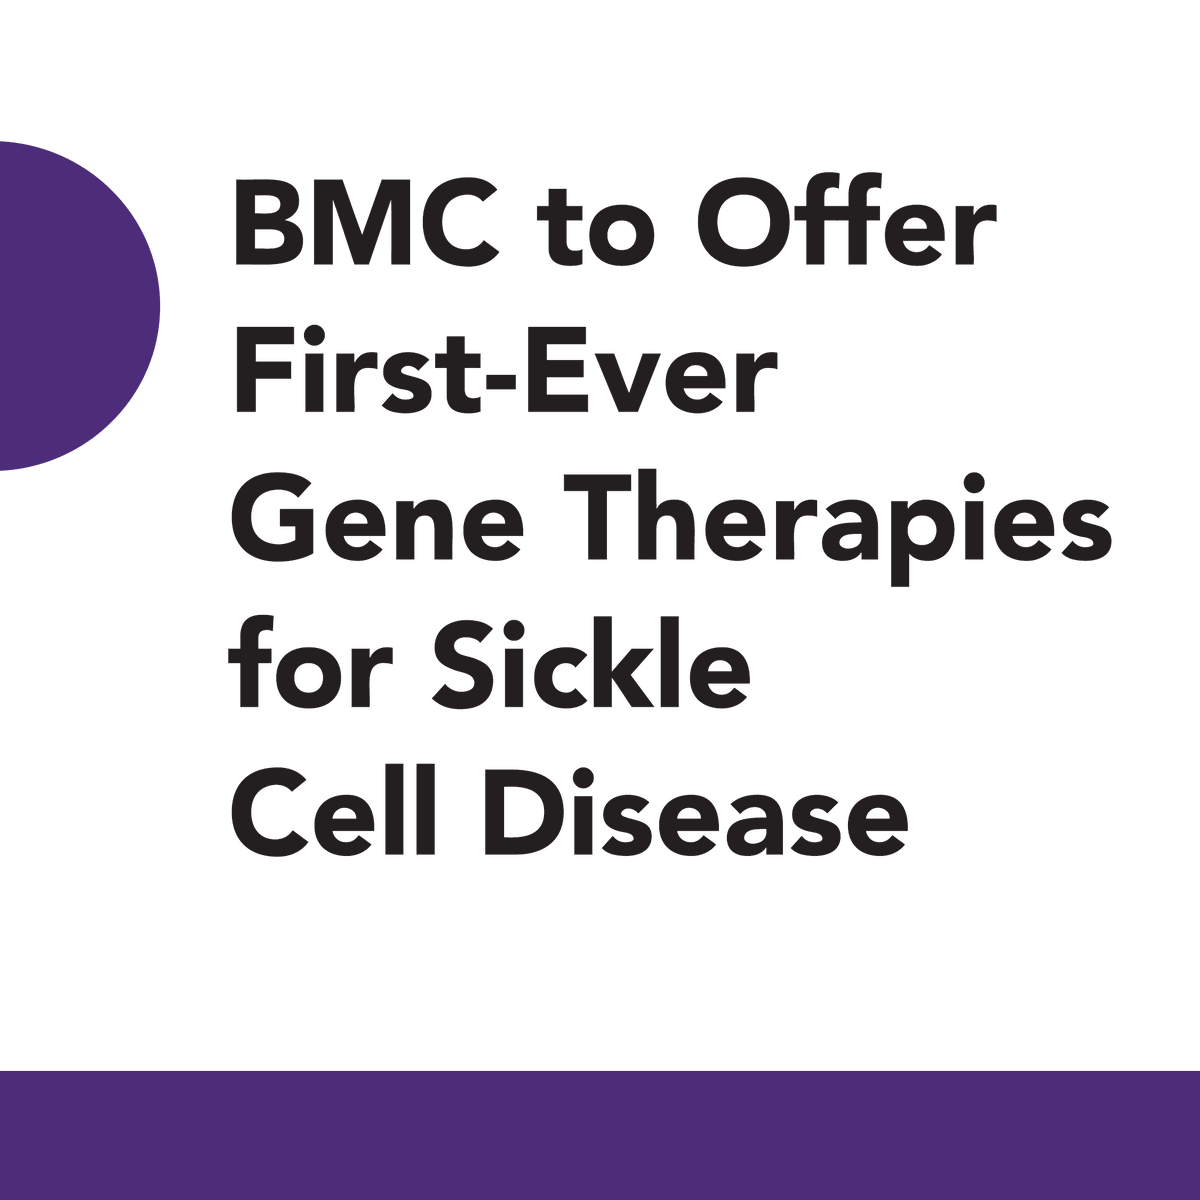 We’re proud to offer the first-ever gene therapies for sickle cell disease. This reflects our ongoing commitment to being a leader in offering advanced, equitable care to our patients. Read more: bit.ly/3RBCVF3